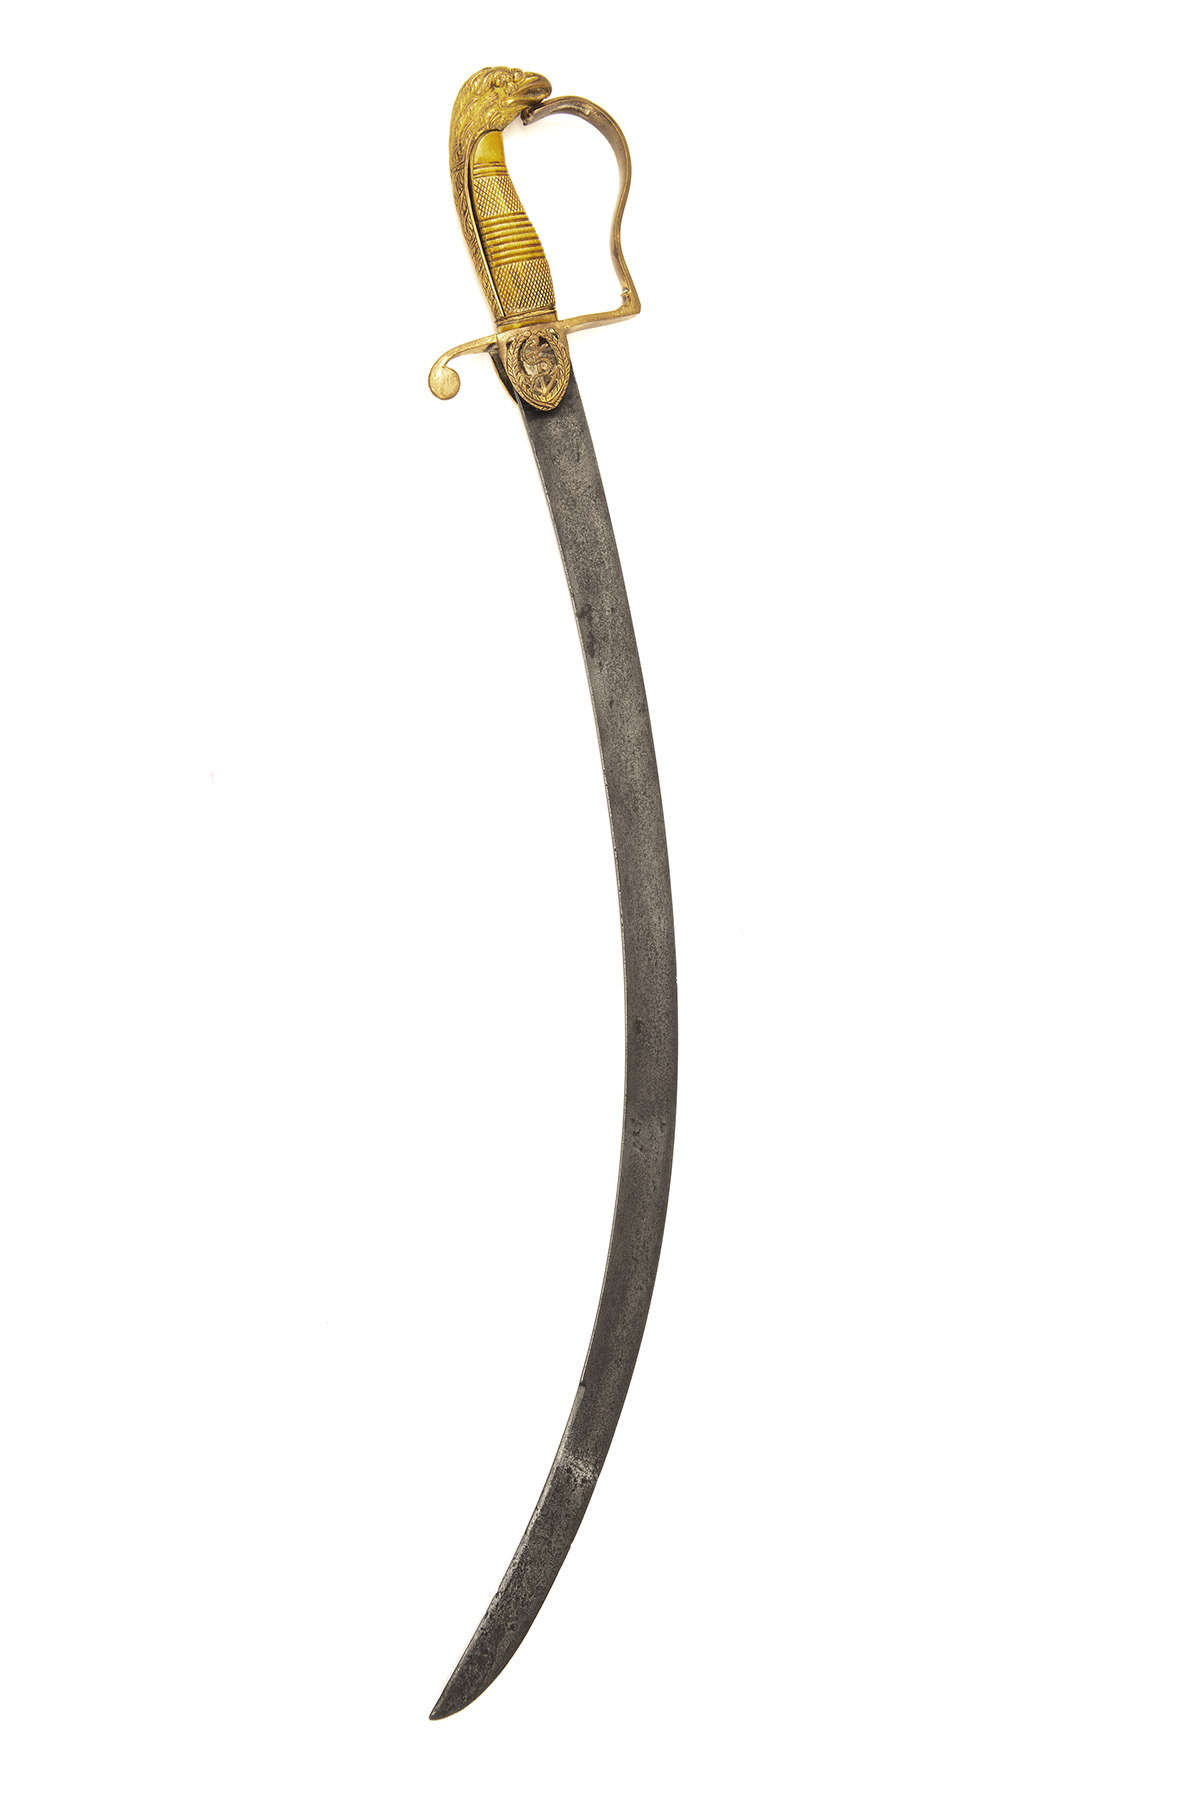 A GEORGIAN NAVAL OFFICER'S SABRE WITH IVORY HILT, probably English circa 1795, with heavily curved